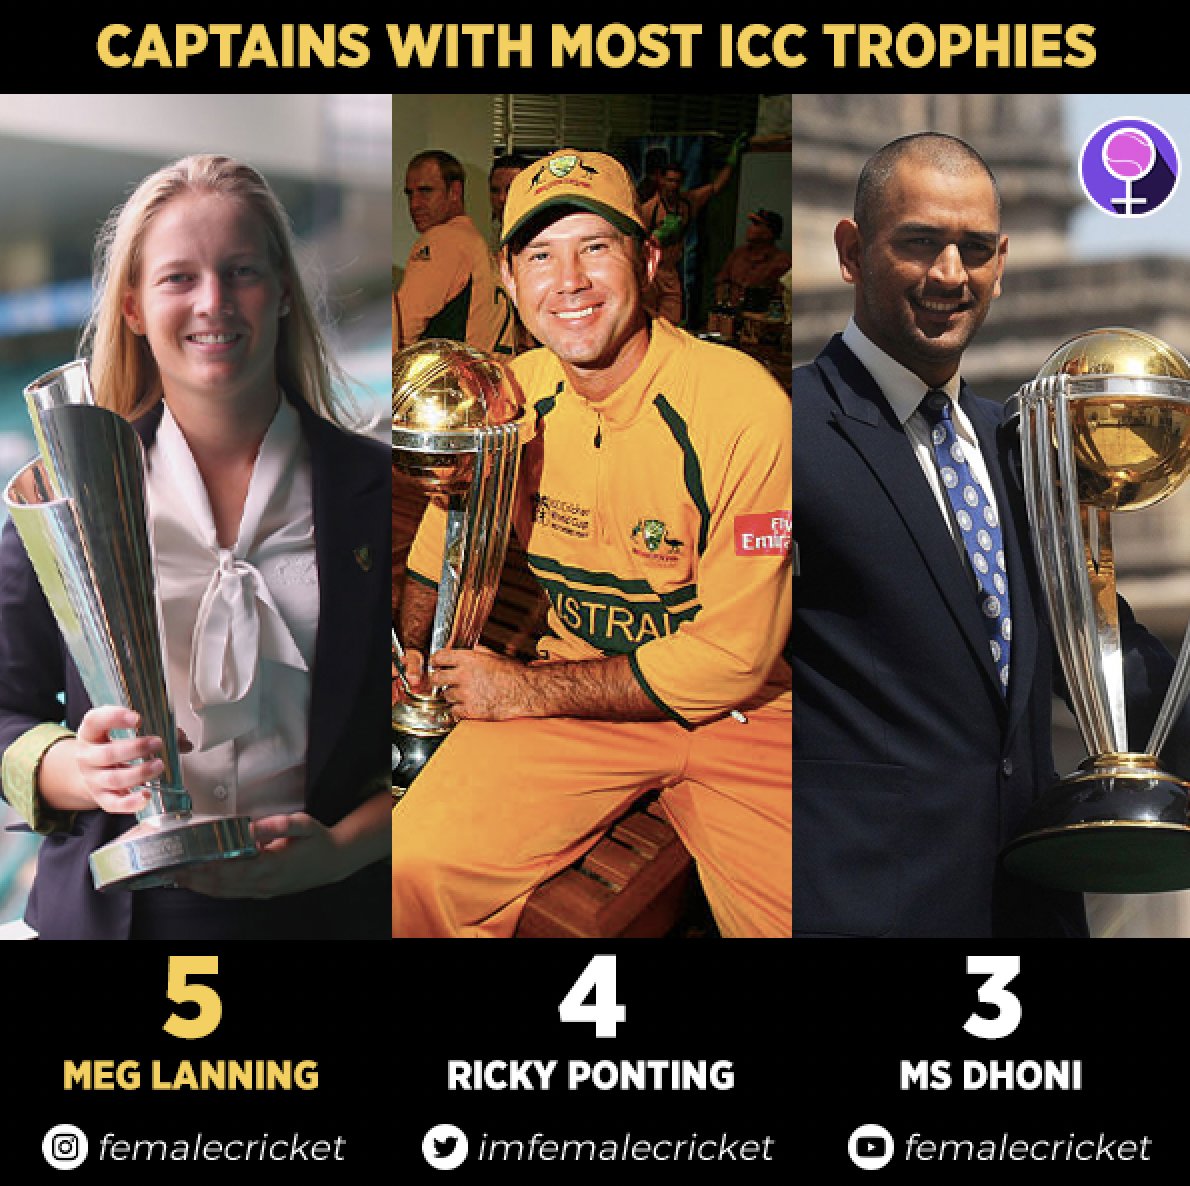 Meg Lanning now holds Most ICC Titles as Captain  💛😍 

Ricky Ponting: 4 Titles
MS Dhoni: 3 Titles

#CricketTwitter #t20worldcupfinal